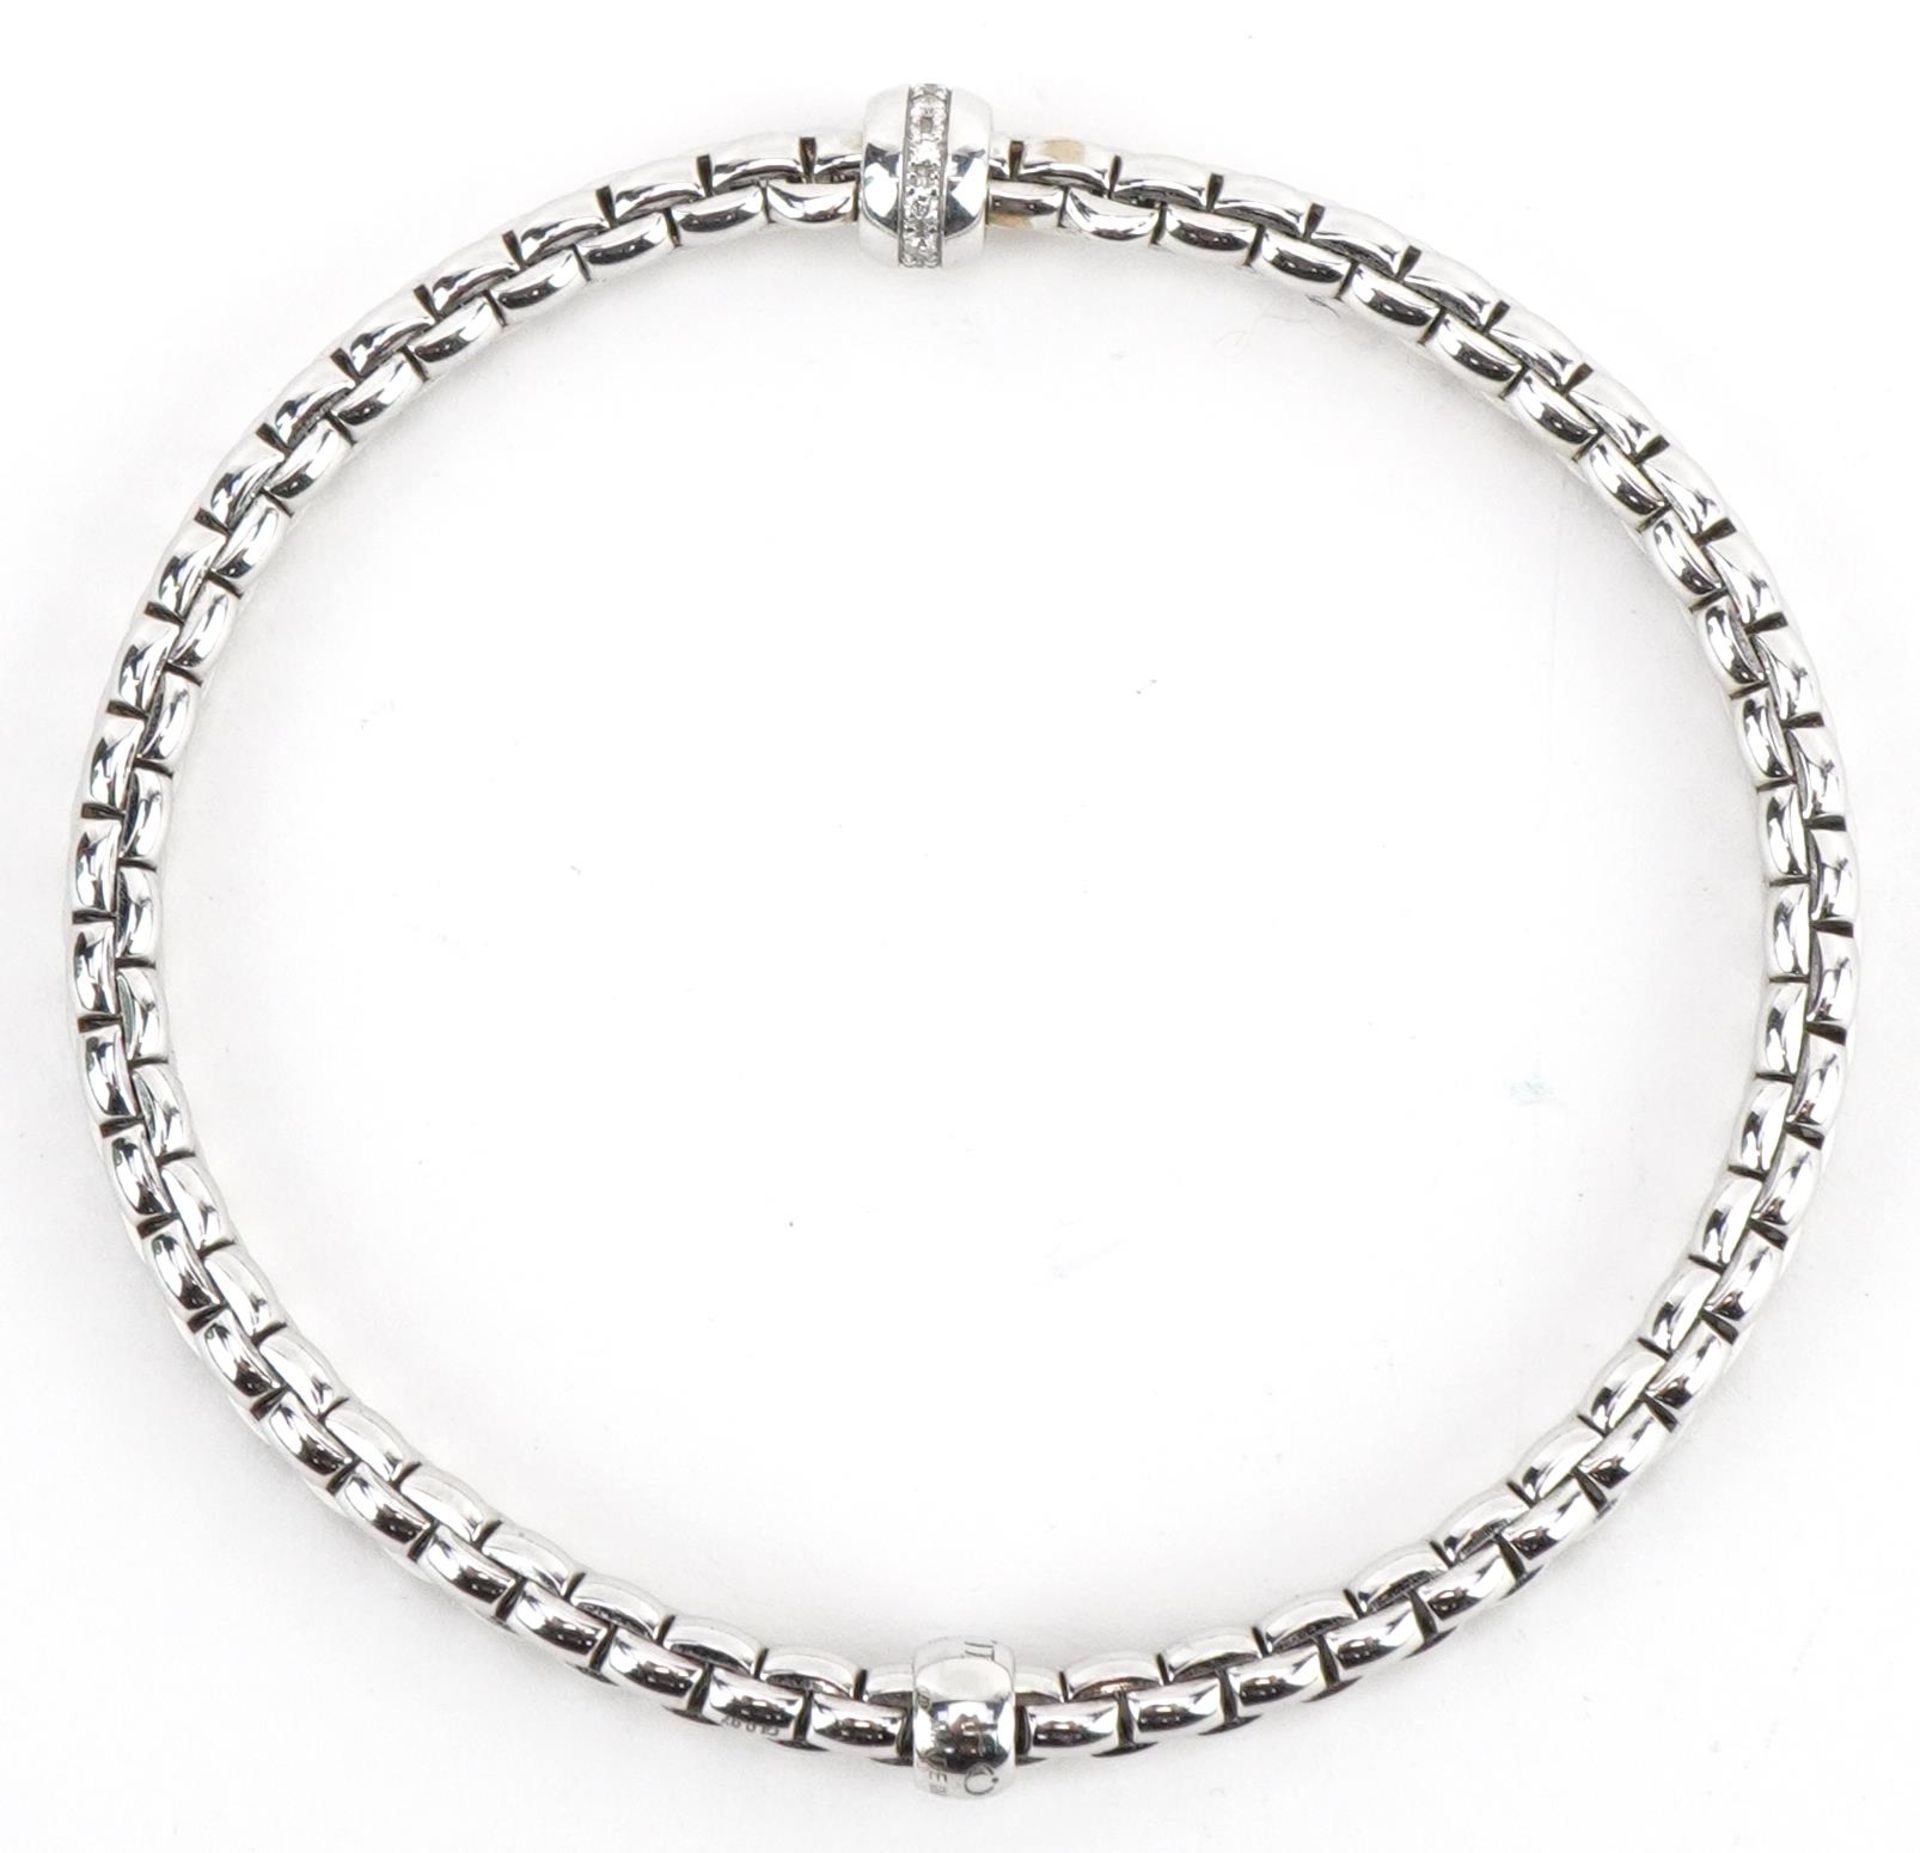 Fope, Italian 18ct white gold and diamond Flex'It bracelet with box, 16cm in length, 9.6g - Image 3 of 5